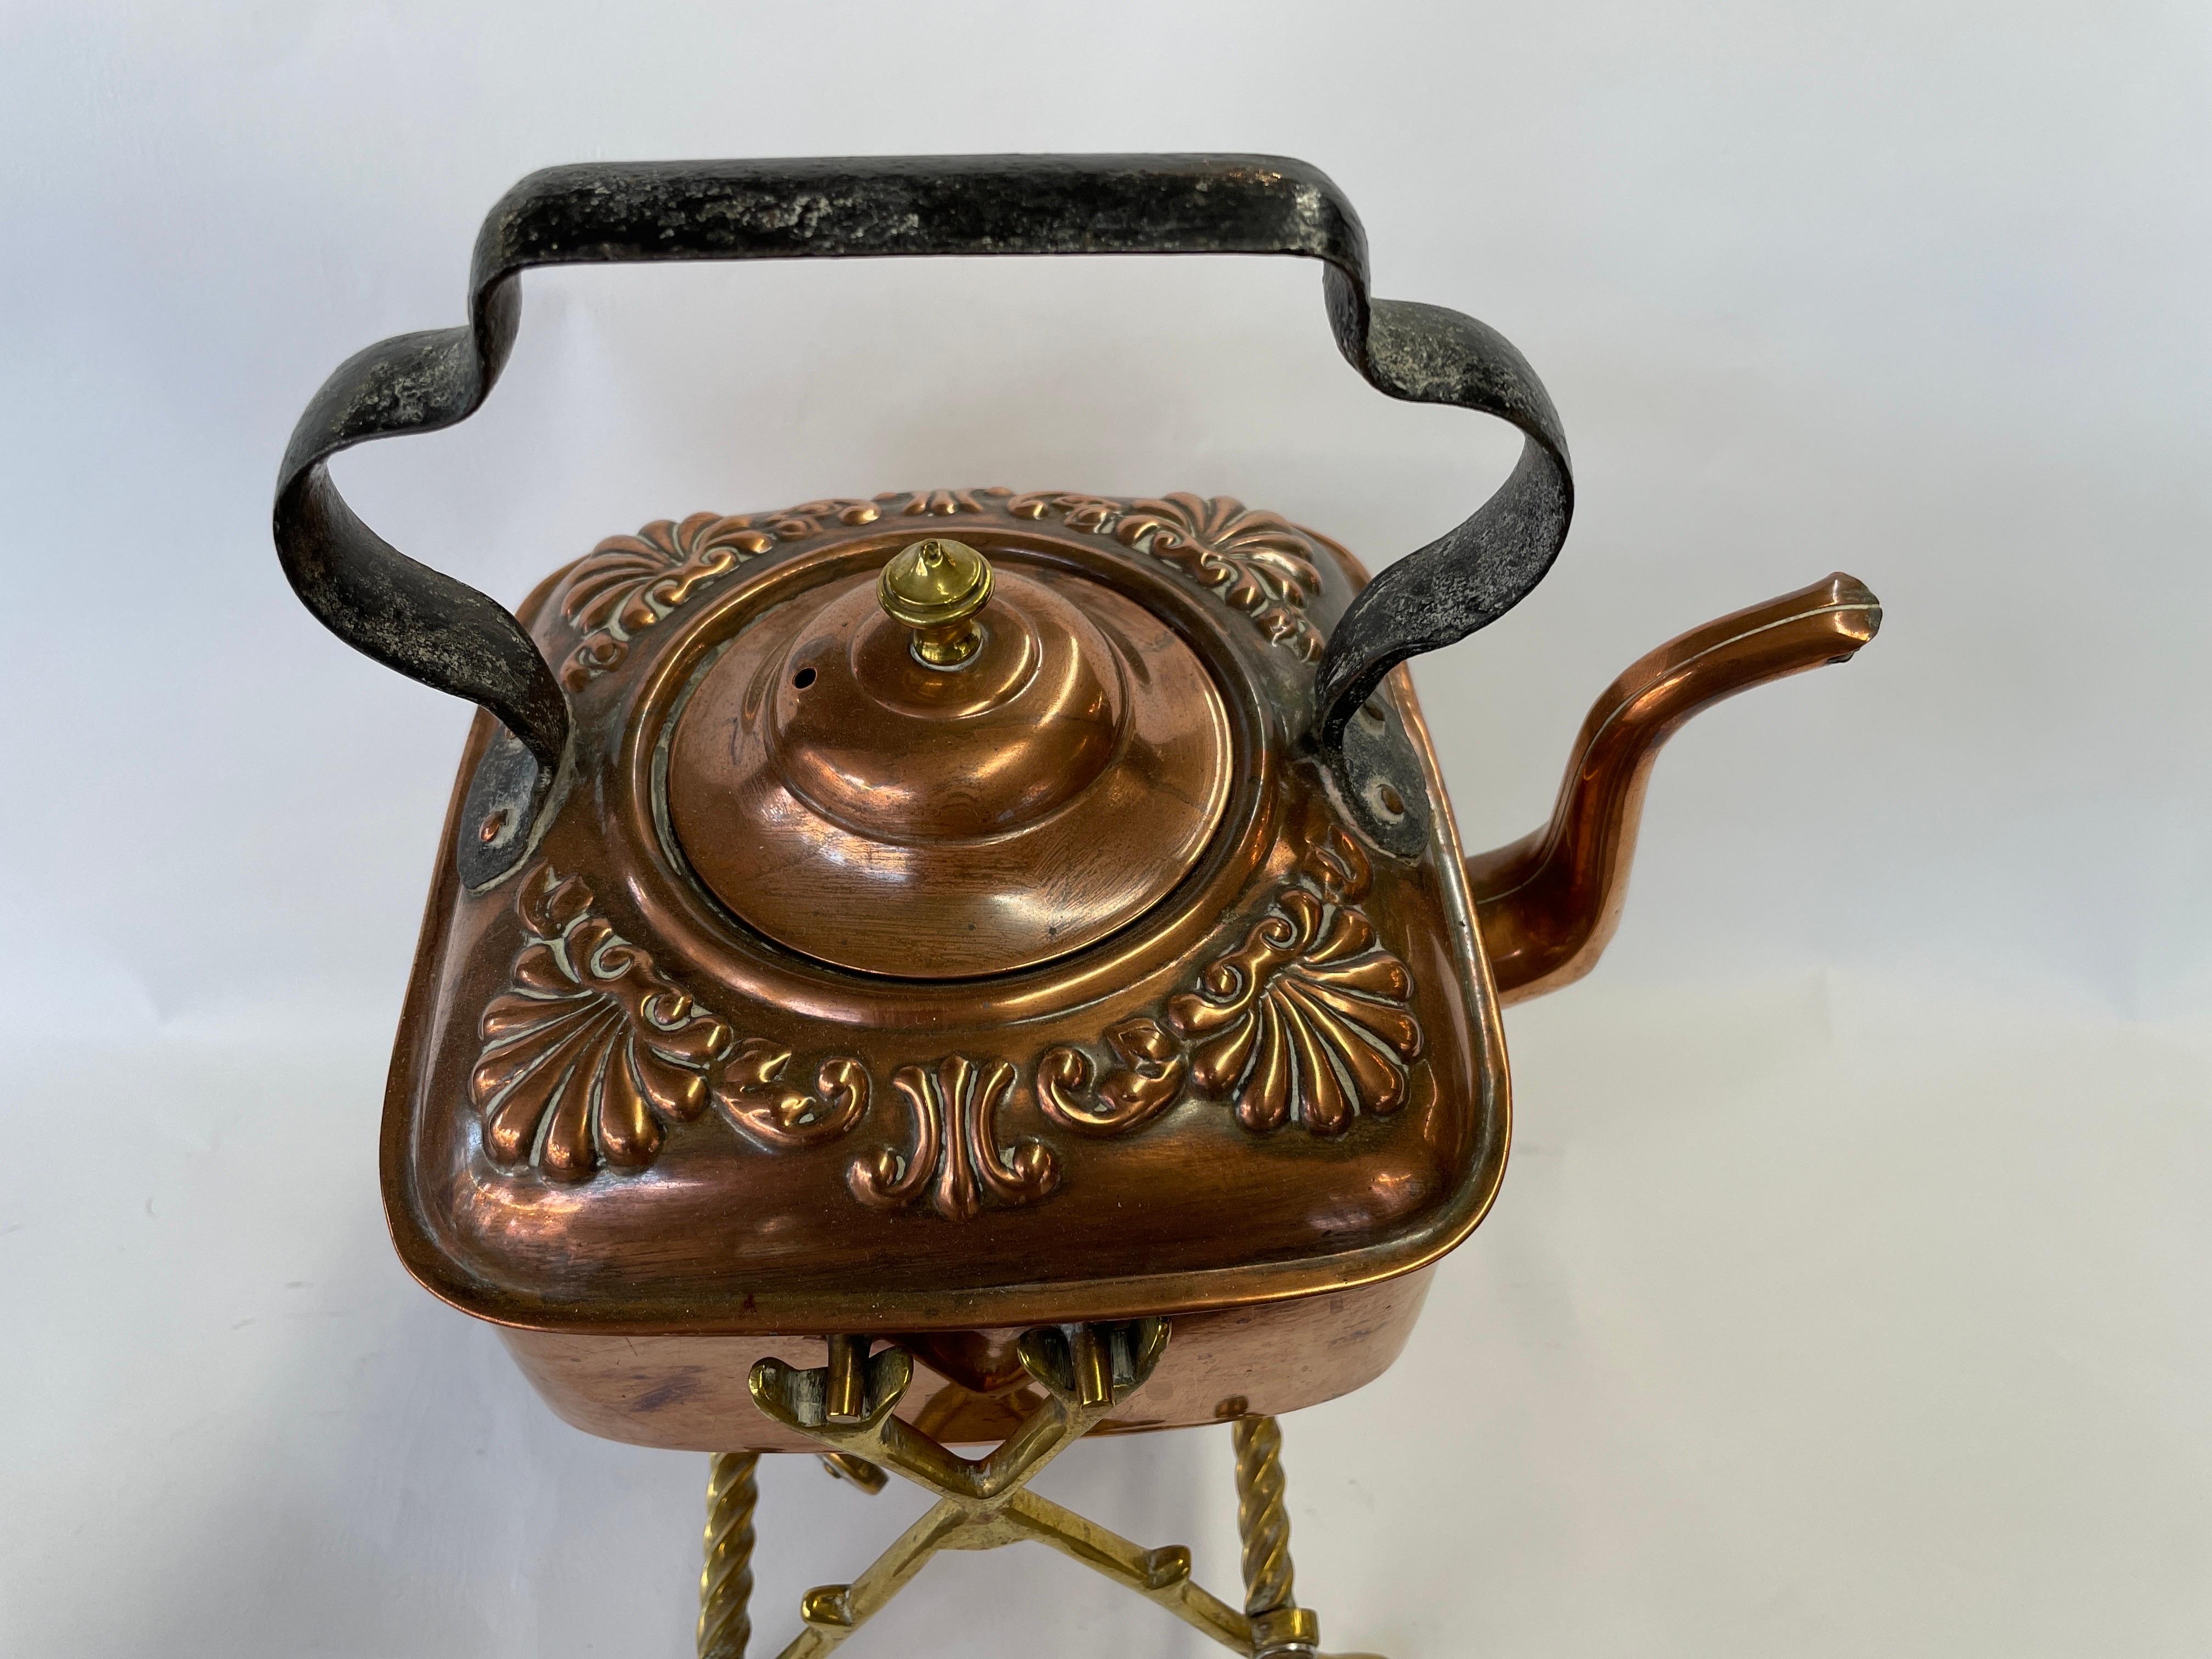 Gorgeous Antique English Arts & Crafts or Aesthetic Movement hand chased copper and wrought iron square tea kettle on its original brass barley twist stand with original copper burner. The dimensions shown are the overall dimensions with the kettle